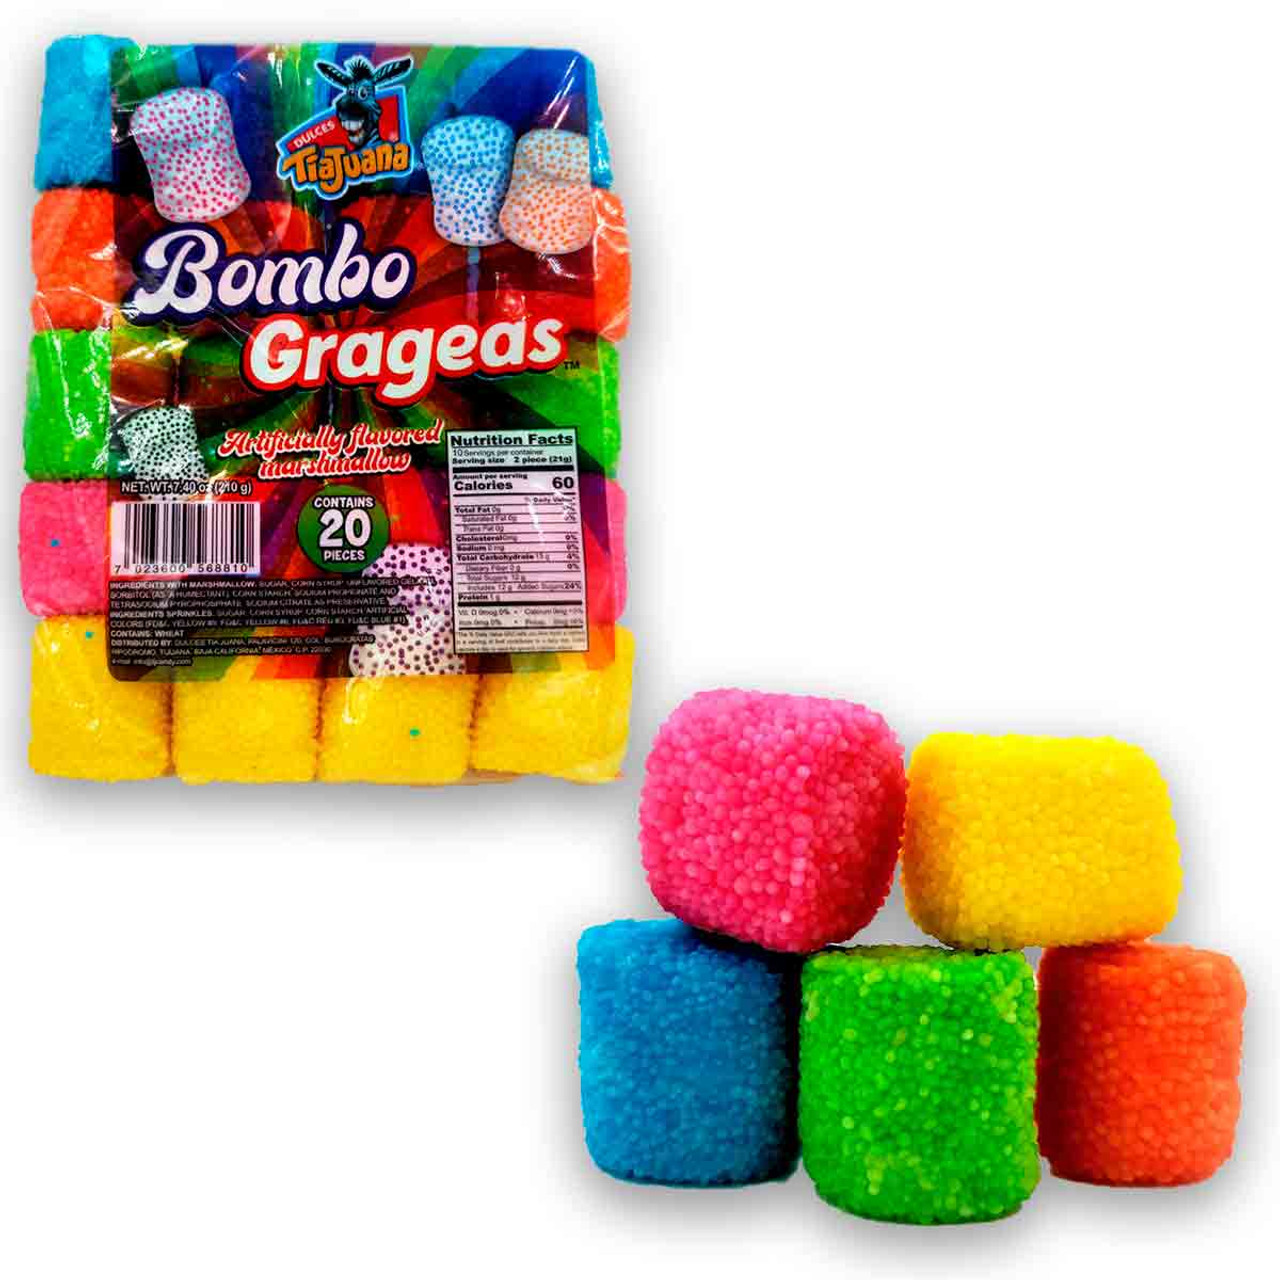 The Gragea Colors are delicious marshmallows with spongy textures and small candy balls full of colorful hues like, pink, yellow, blue, green and some others.